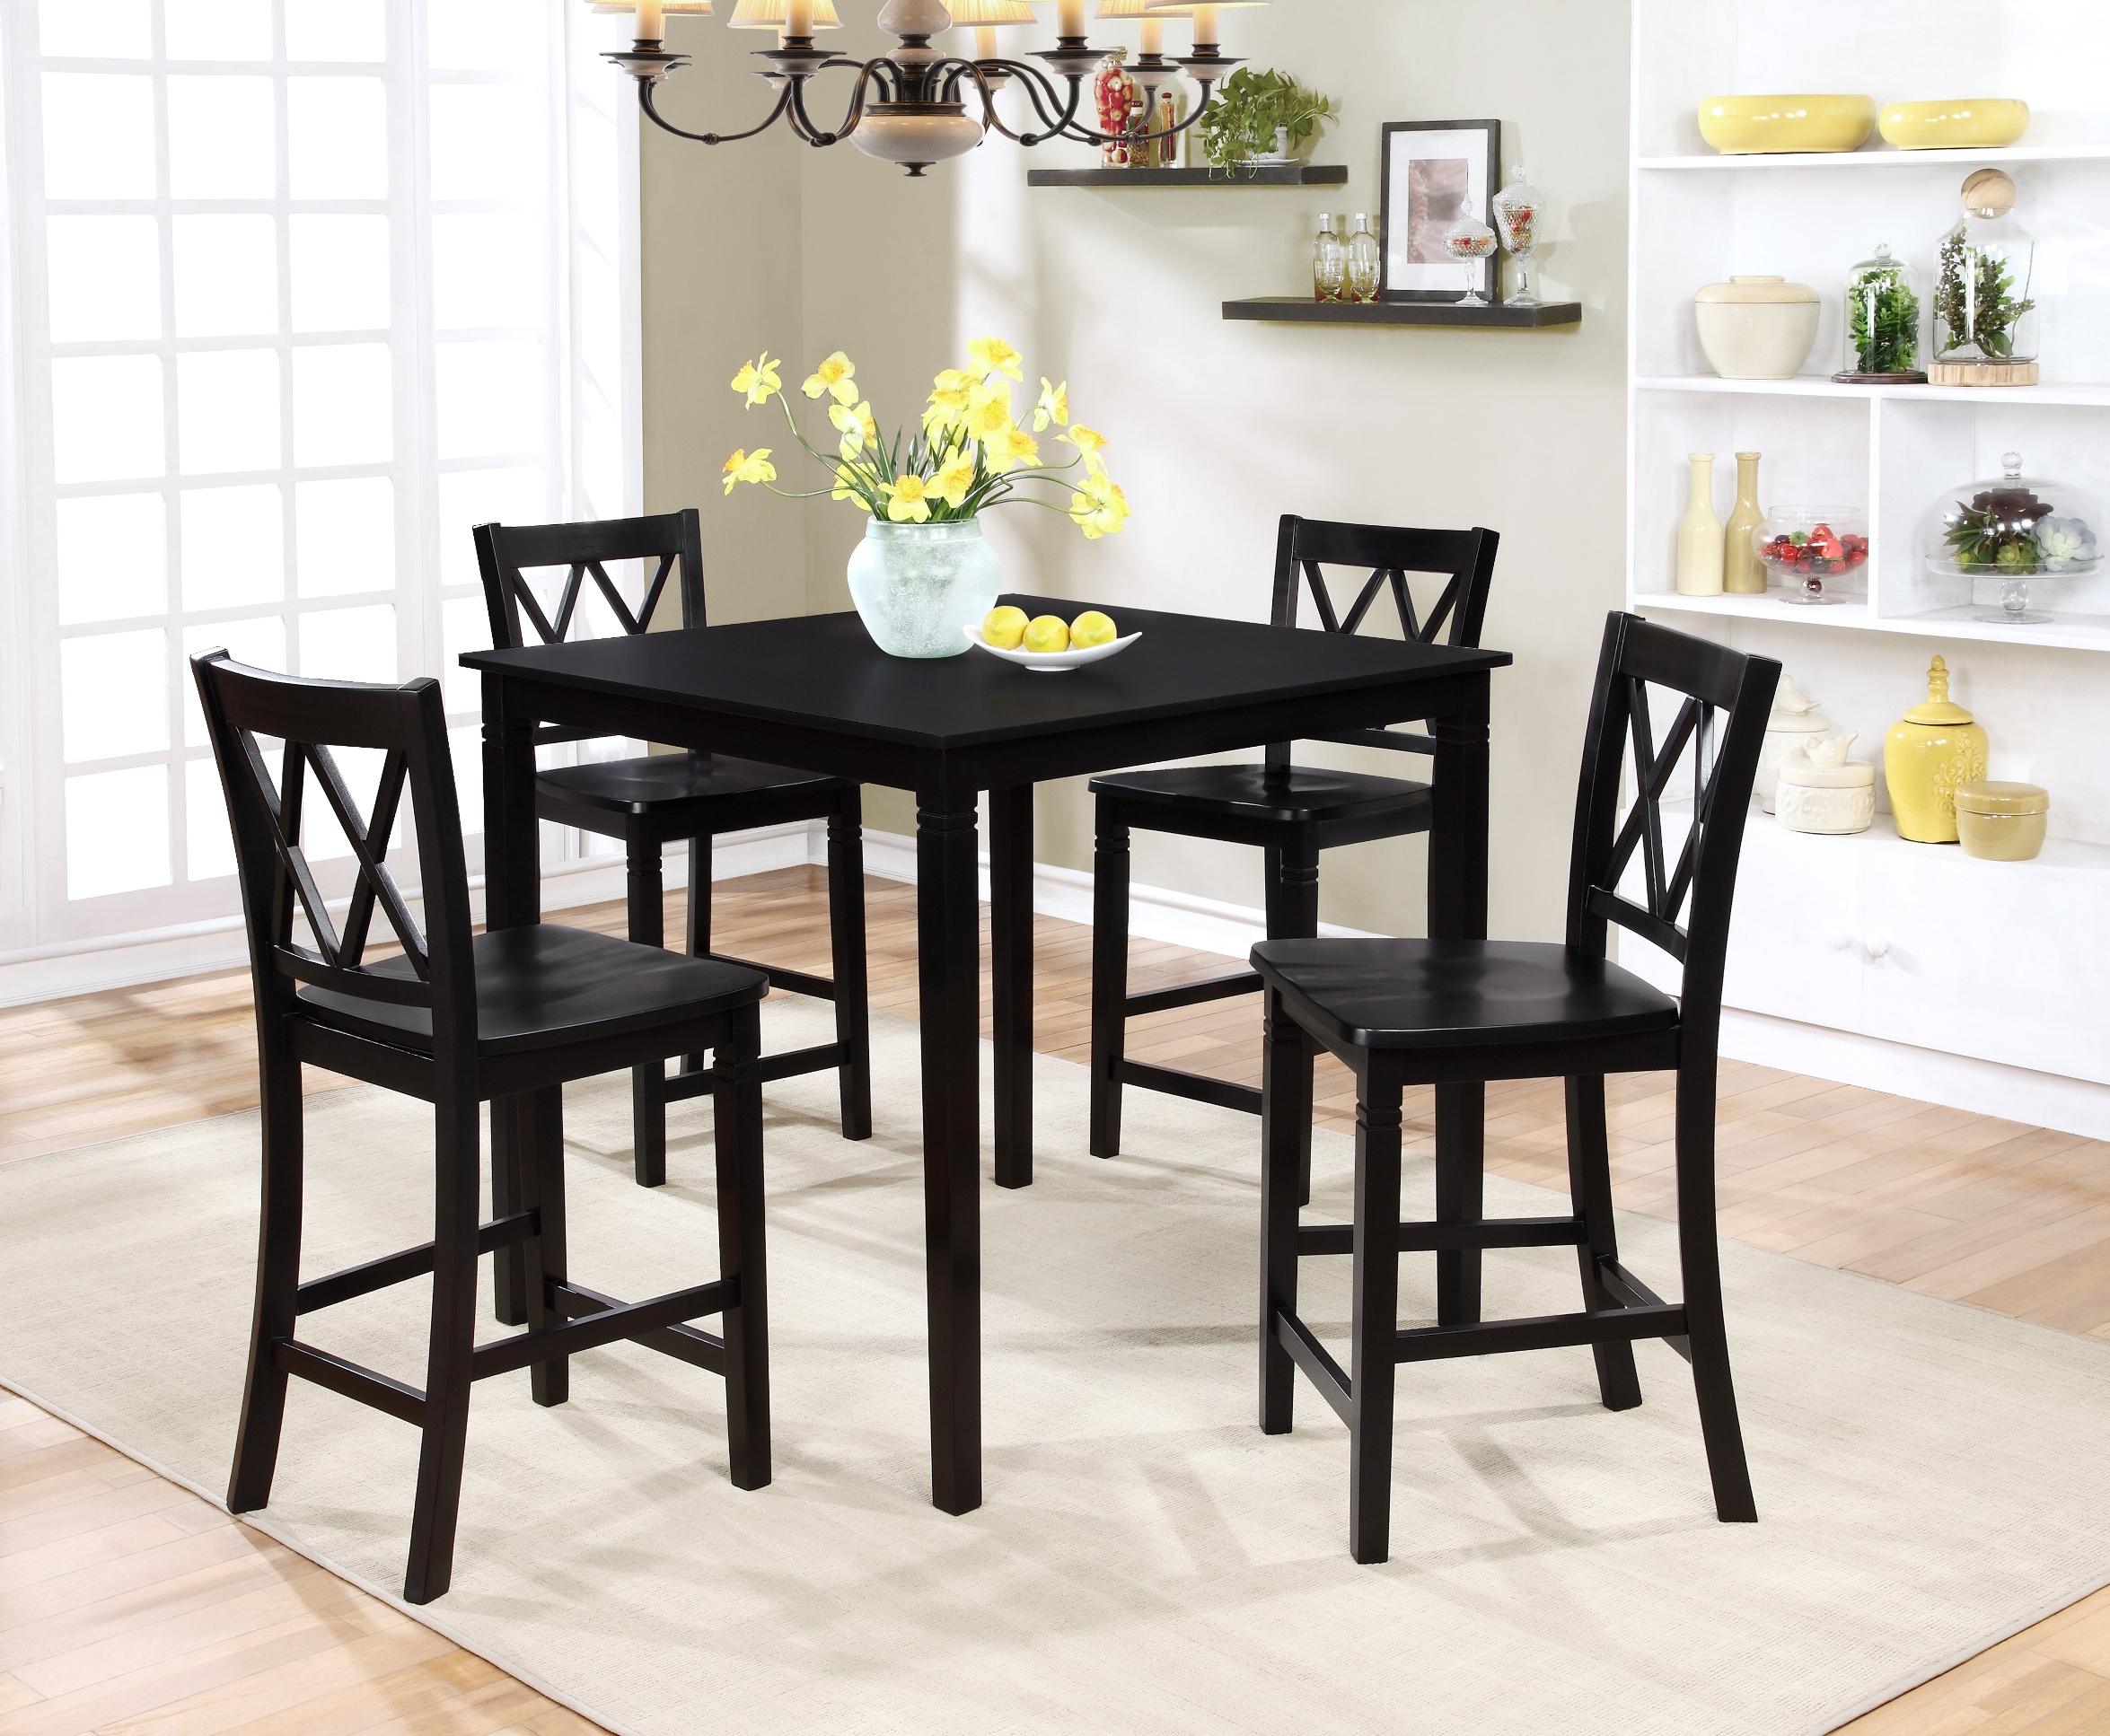 small dining sets ... small dining set dining room, dining room table with bench 7 piece QGZOXBO